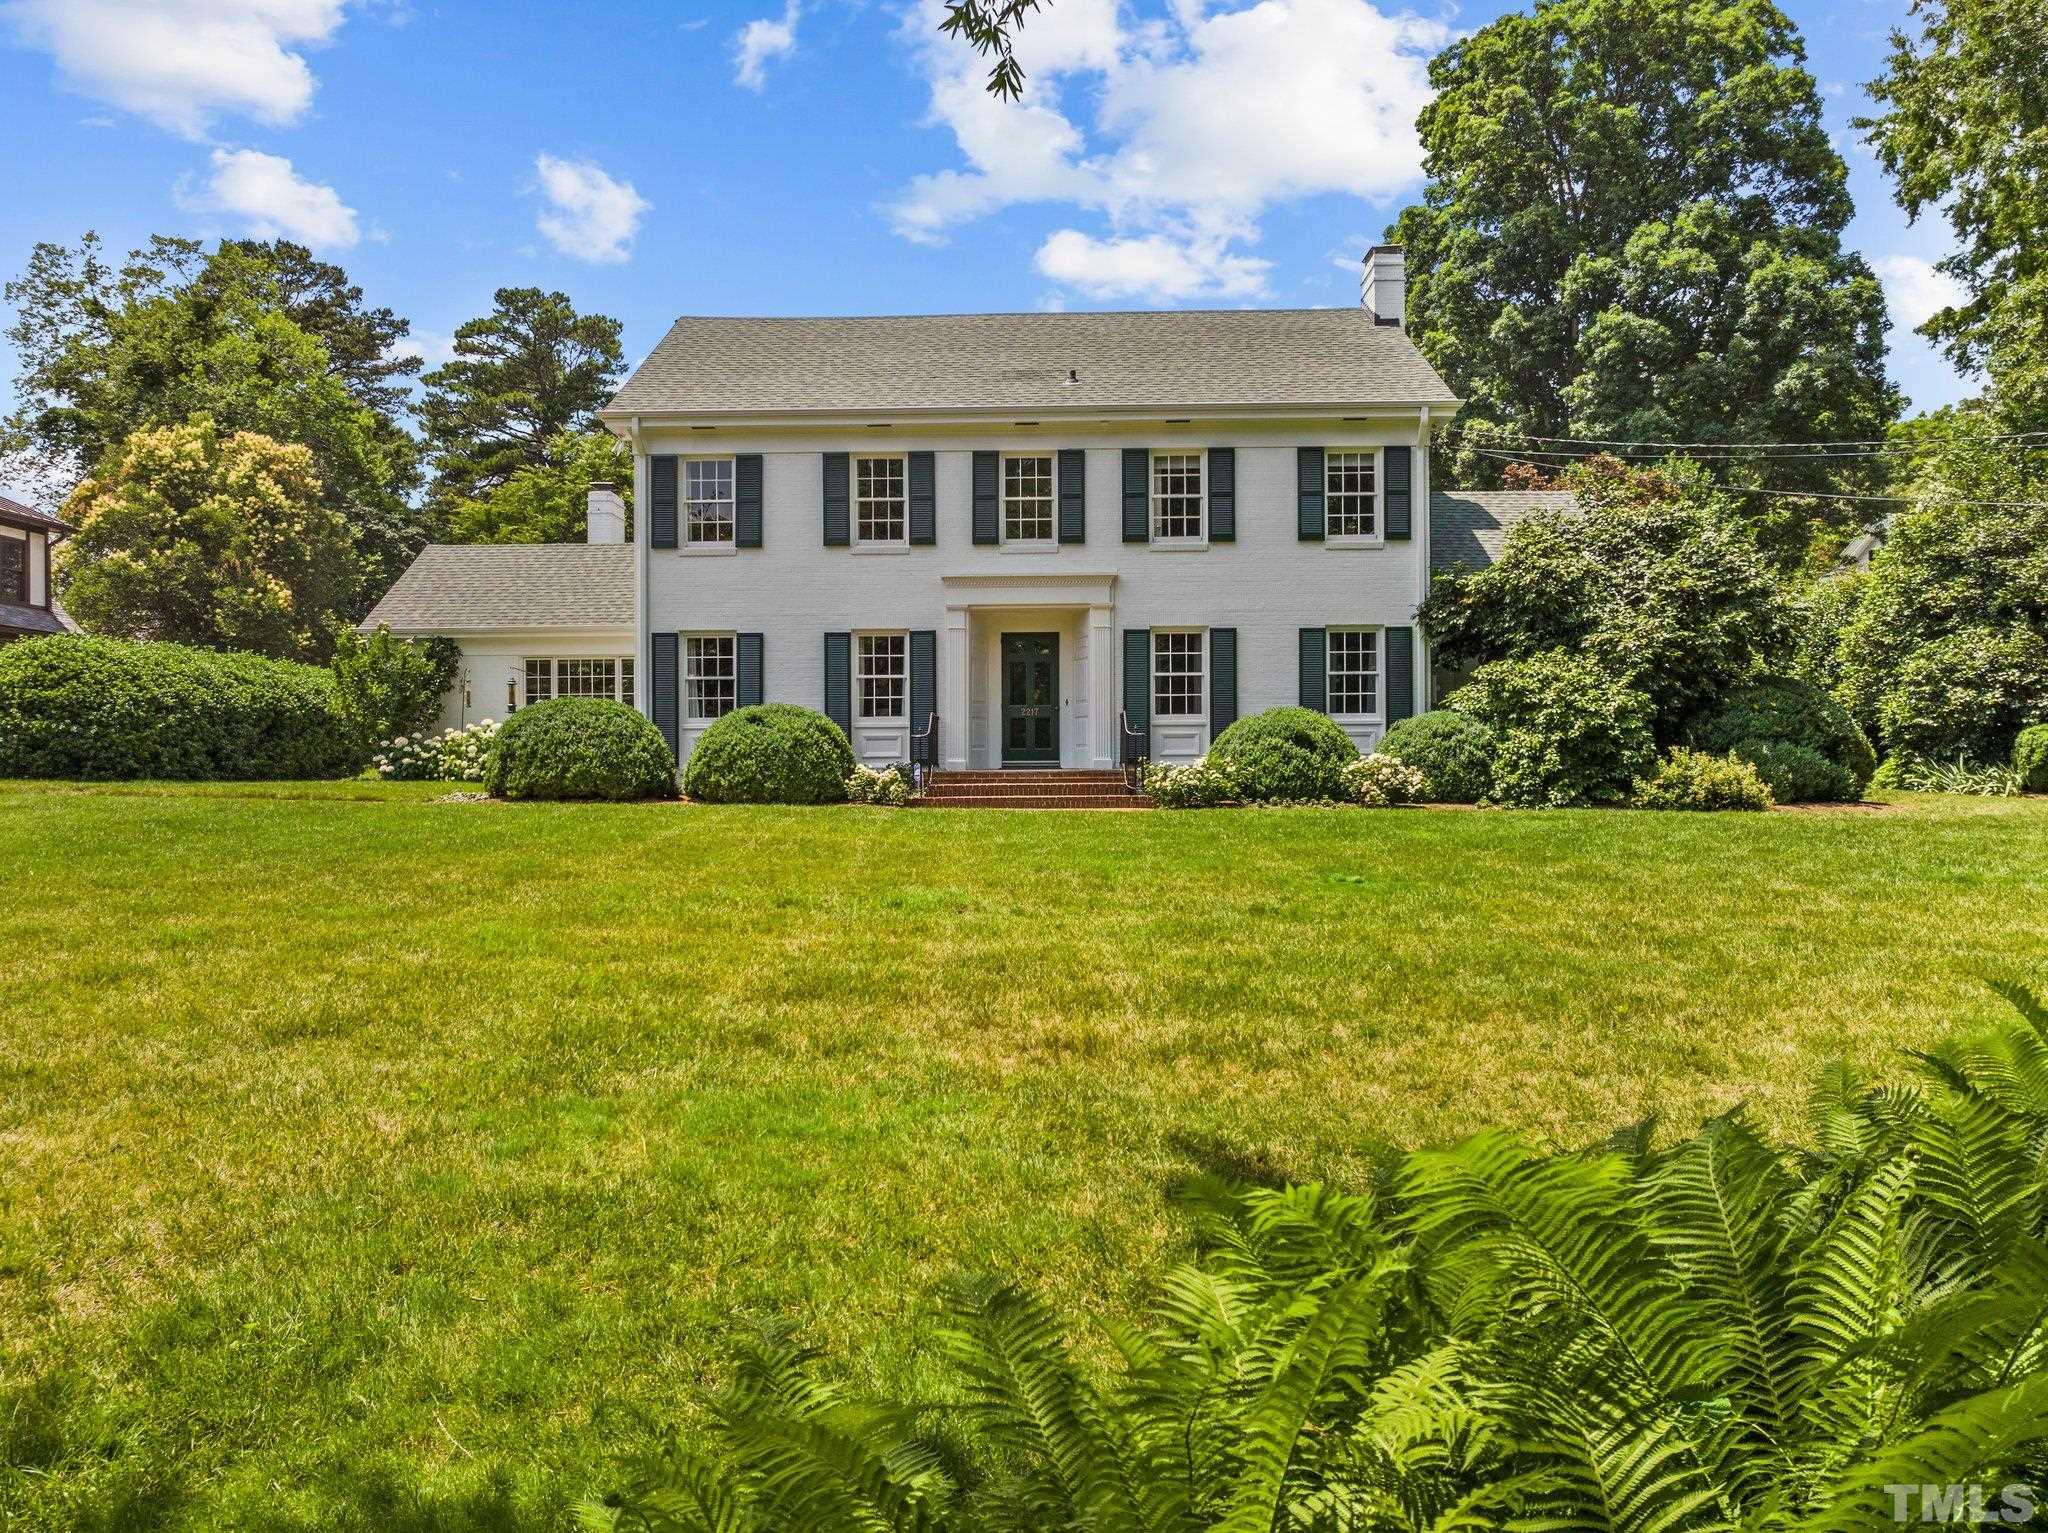 Exquisite classically designed brick home in Hayes Barton with enchanting gardens on 0.88 acres.